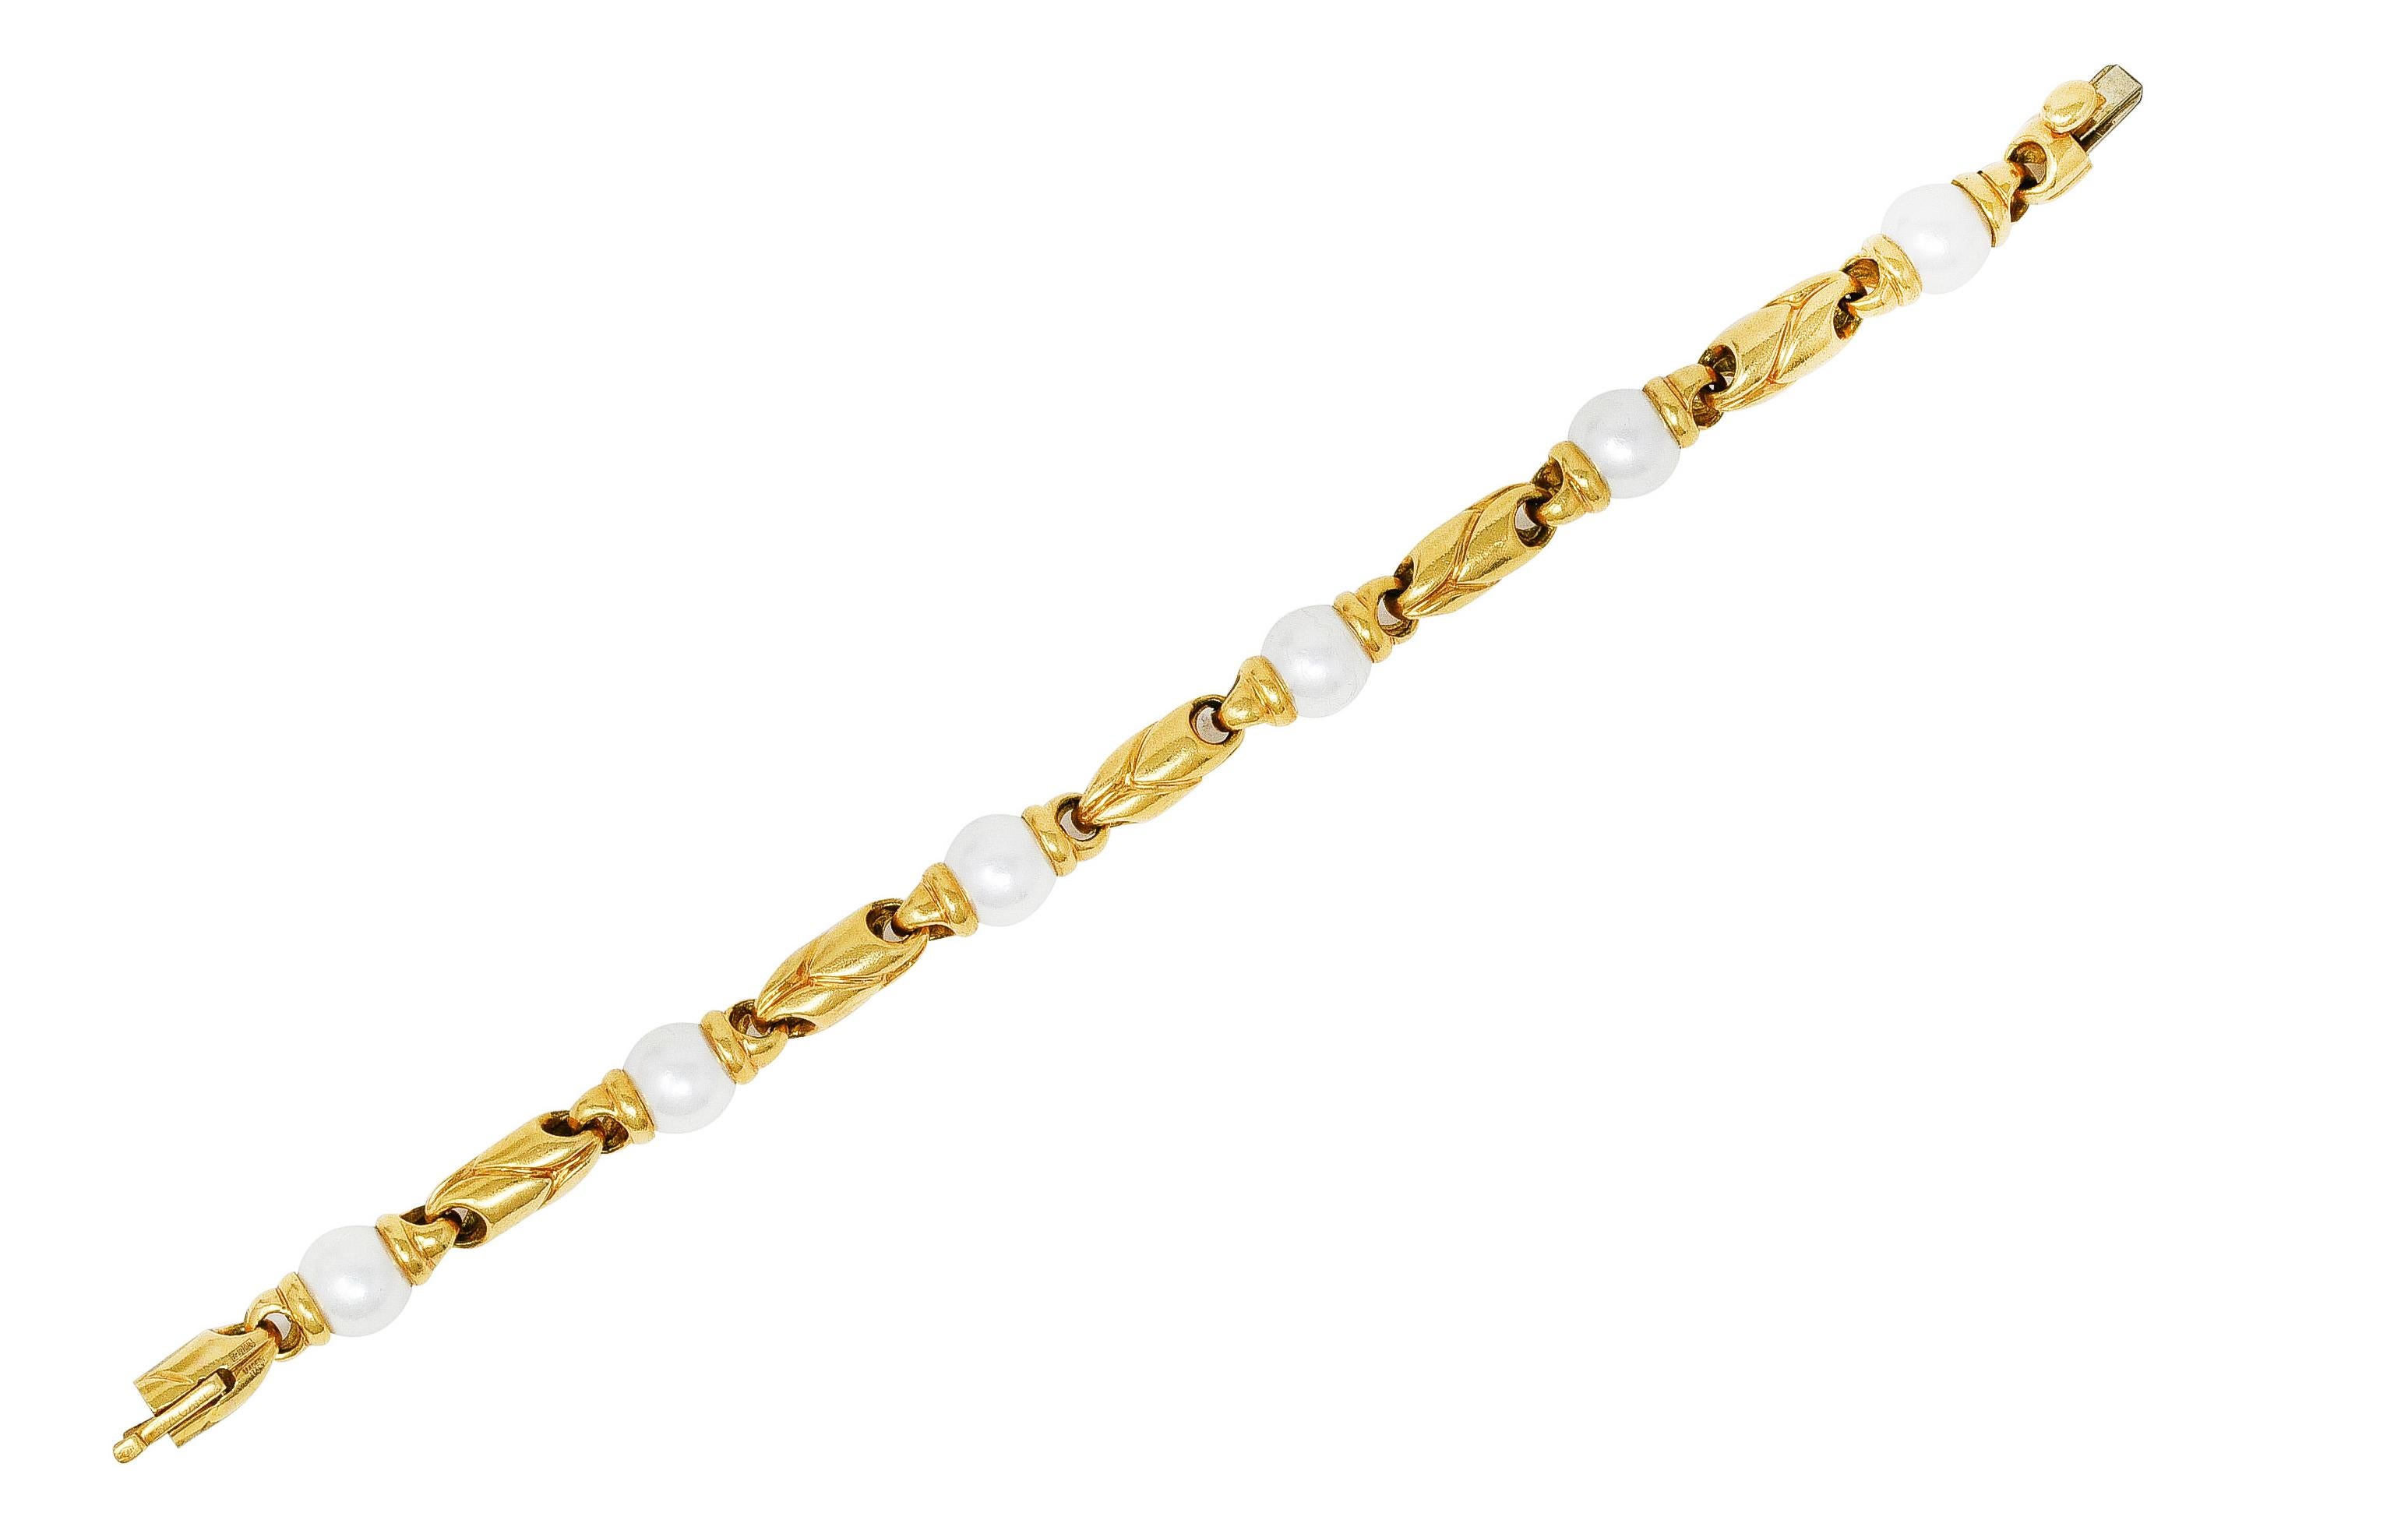 Bracelet is comprised of deeply grooved Passo Doppio gold links. Alternating with 8.0 mm round pearls set between gold terminals. White body color with rosé overtones and very good luster. Completed by hidden clasp closure with hinged safety.